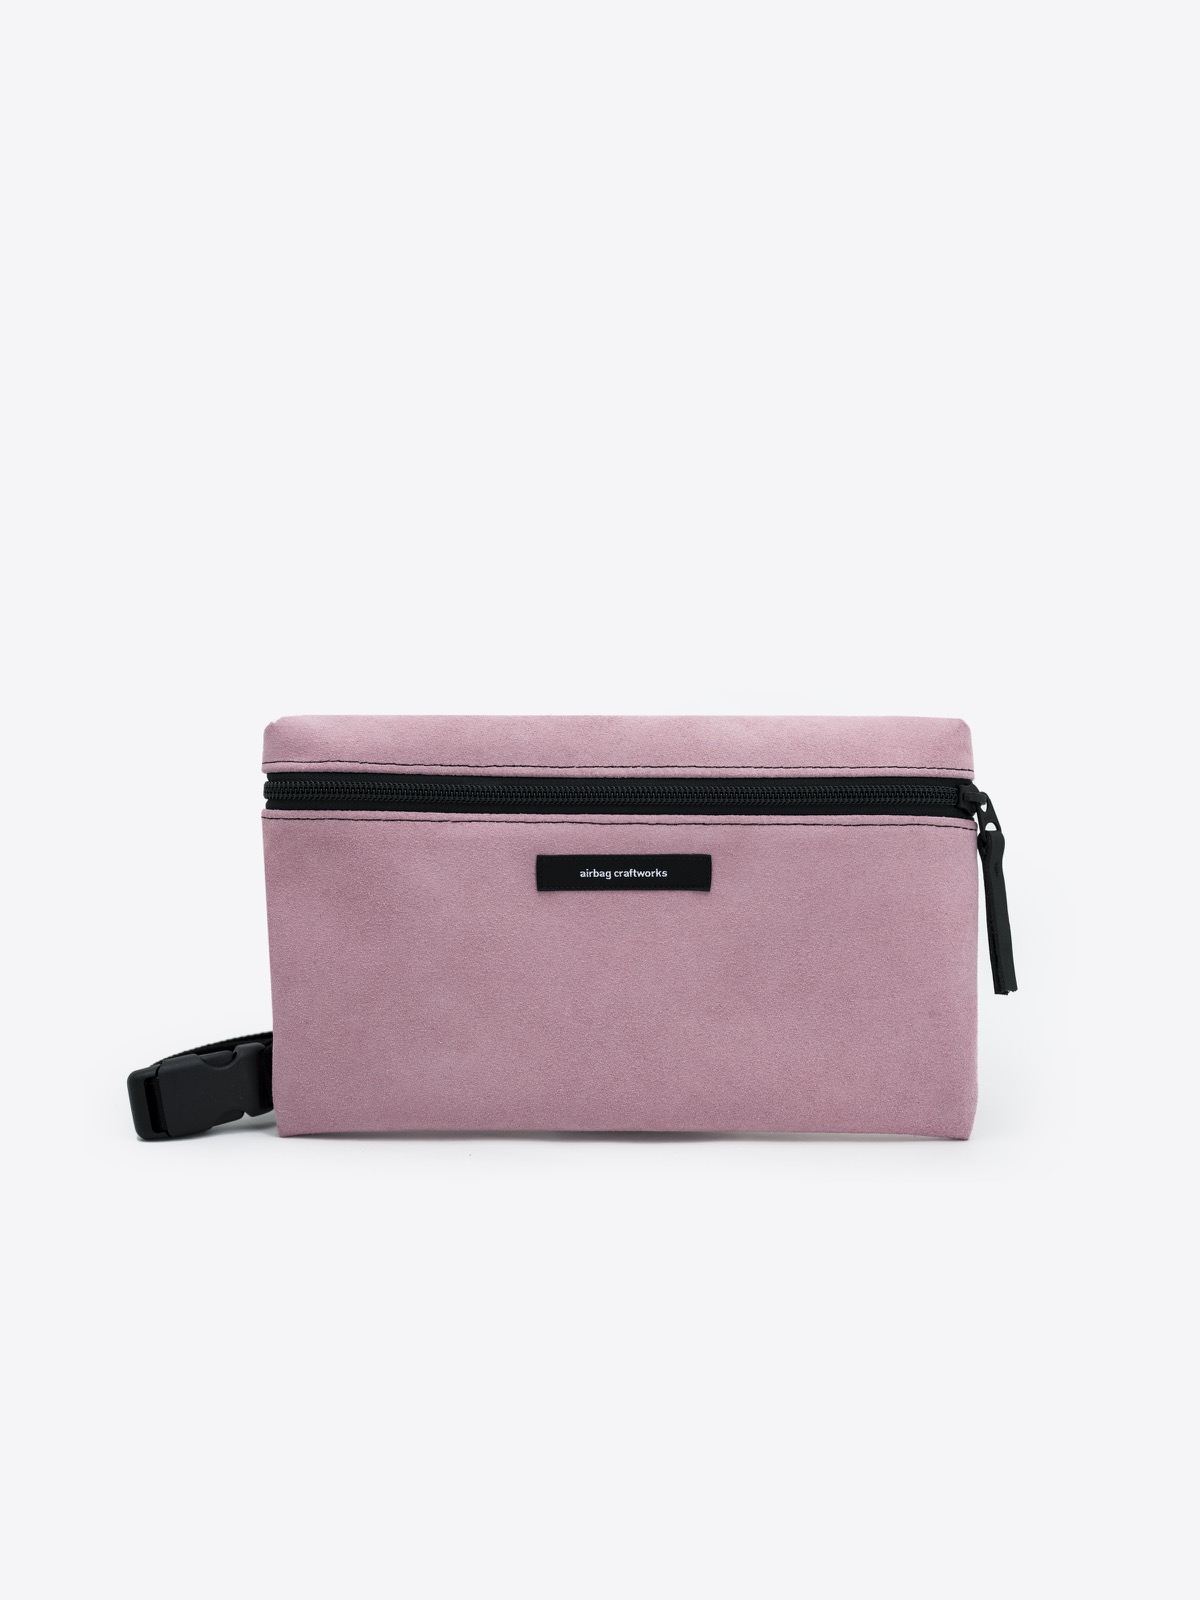 A2 dlx leather | velour pink